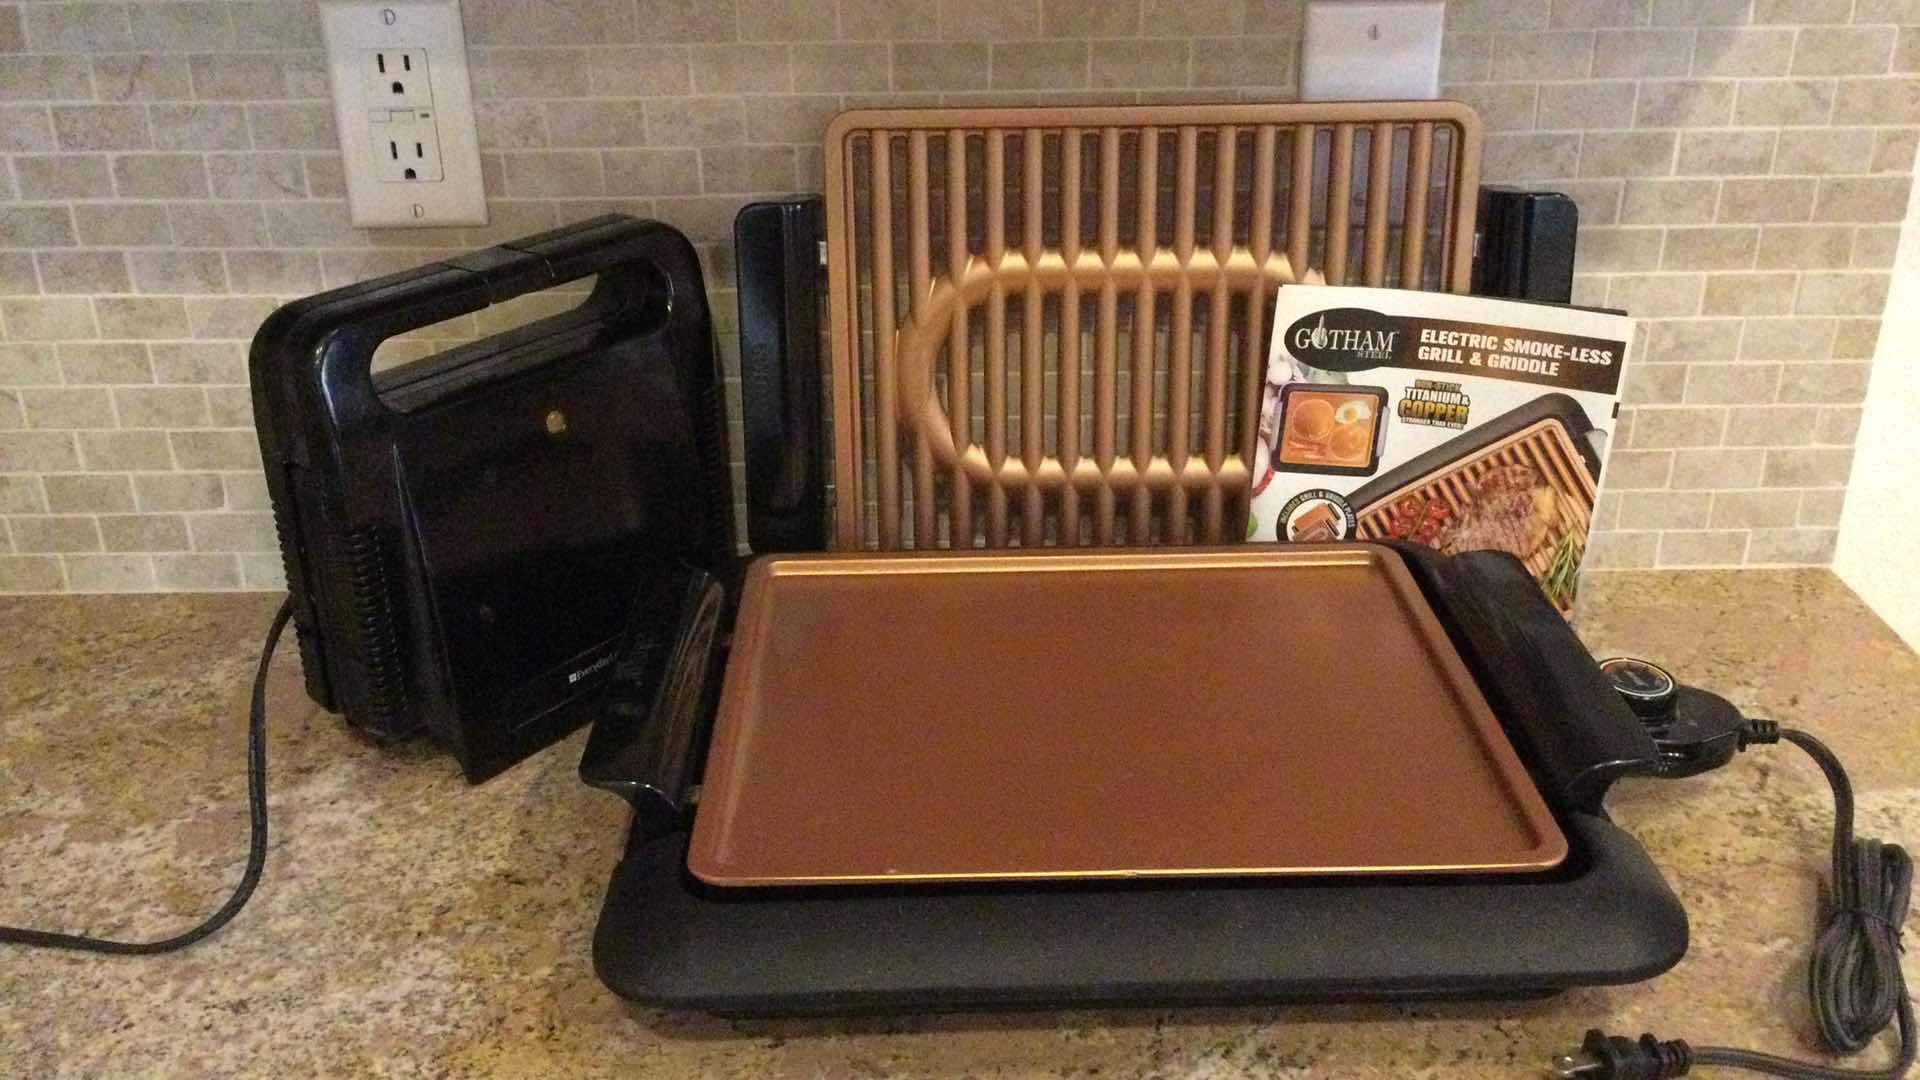 Photo 4 of GOTHAM ELECTRIC SMOKE-LESS GRILL & GRIDDLE W/ EVERYDAY LIVING WAFFLE MAKER (TESTED)